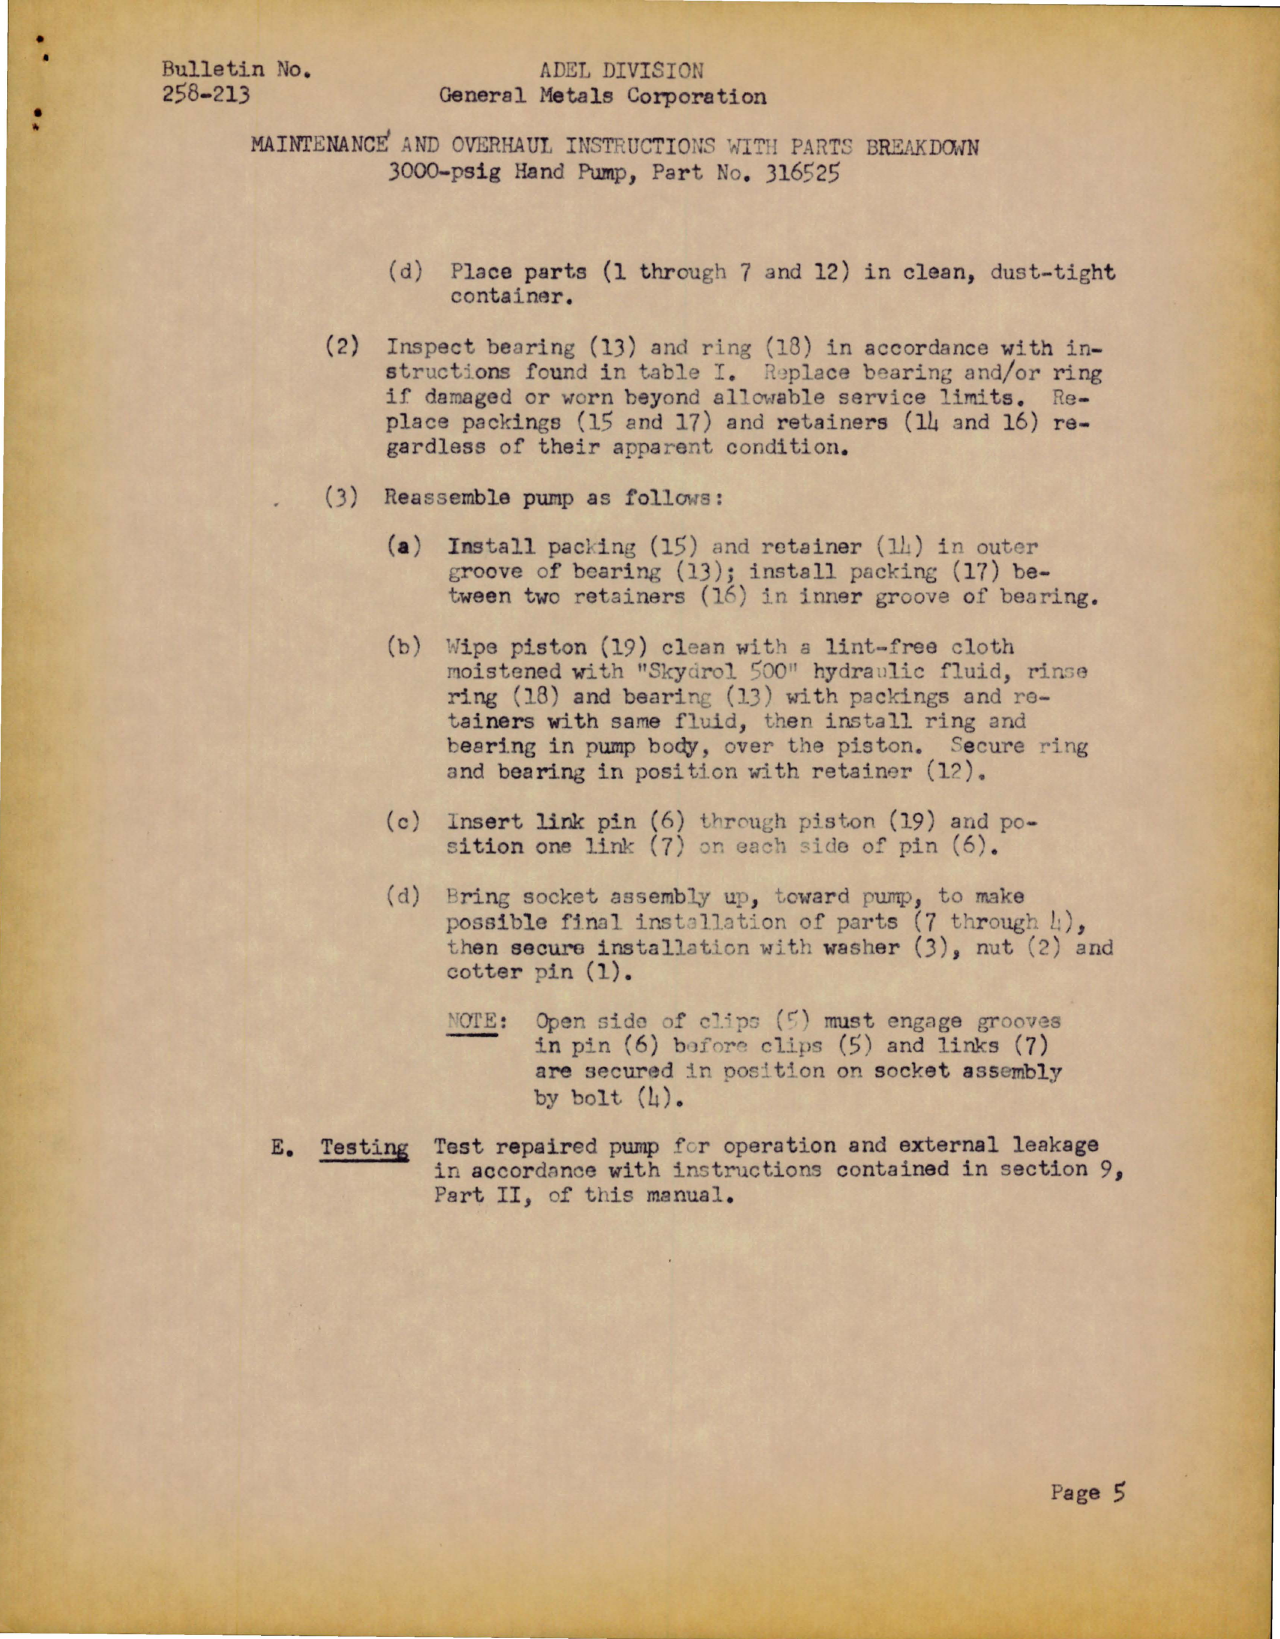 Sample page 5 from AirCorps Library document: Maintenance and Overhaul Instructions w Parts for 3000PSI Hand Pump - Part 316525 